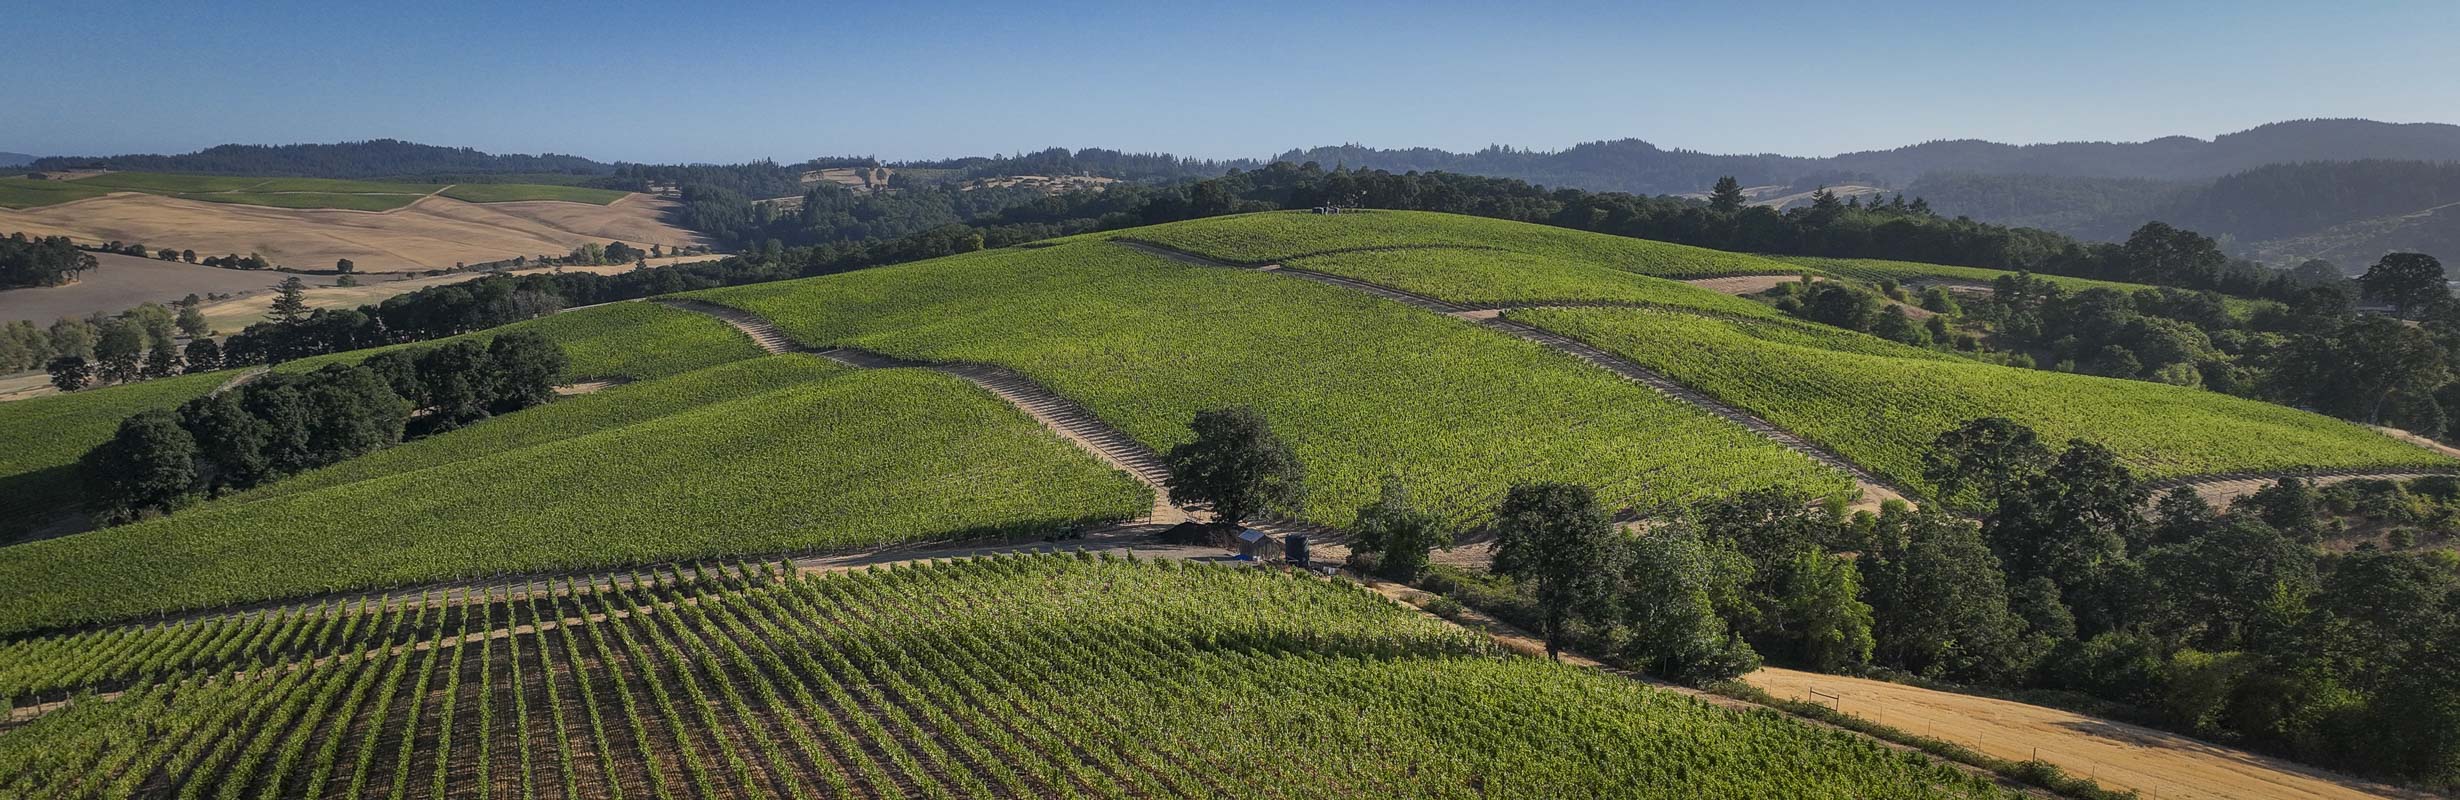 aerial view of vineyard on hilltop with oak forests at margins